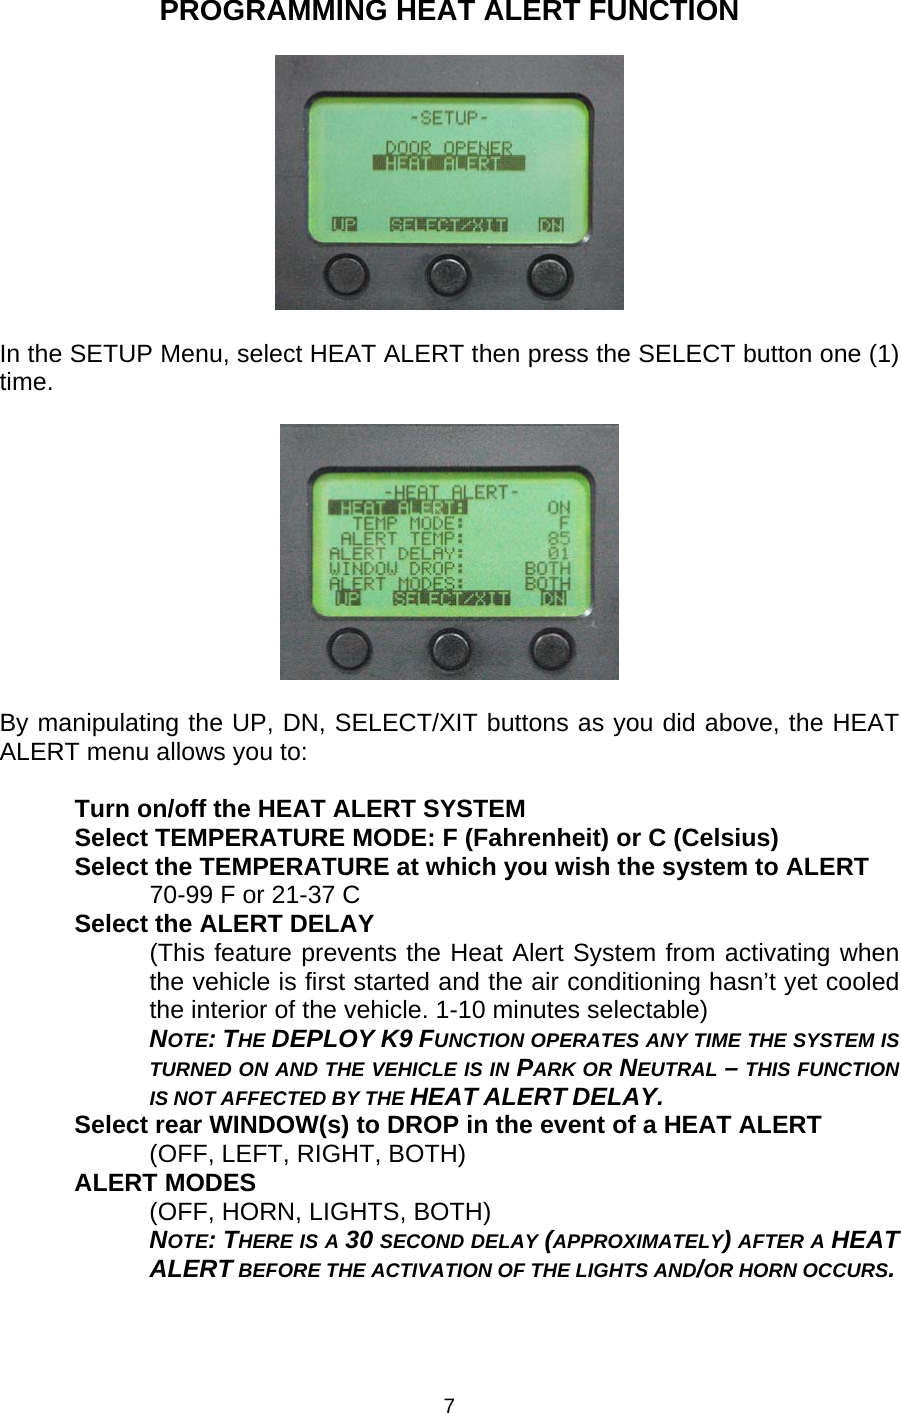 PROGRAMMING HEAT ALERT FUNCTION    In the SETUP Menu, select HEAT ALERT then press the SELECT button one (1) time.    By manipulating the UP, DN, SELECT/XIT buttons as you did above, the HEAT ALERT menu allows you to:  Turn on/off the HEAT ALERT SYSTEM Select TEMPERATURE MODE: F (Fahrenheit) or C (Celsius) Select the TEMPERATURE at which you wish the system to ALERT 70-99 F or 21-37 C Select the ALERT DELAY (This feature prevents the Heat Alert System from activating when the vehicle is first started and the air conditioning hasn’t yet cooled the interior of the vehicle. 1-10 minutes selectable)  NOTE: THE DEPLOY K9 FUNCTION OPERATES ANY TIME THE SYSTEM IS TURNED ON AND THE VEHICLE IS IN PARK OR NEUTRAL – THIS FUNCTION IS NOT AFFECTED BY THE HEAT ALERT DELAY. Select rear WINDOW(s) to DROP in the event of a HEAT ALERT (OFF, LEFT, RIGHT, BOTH) ALERT MODES (OFF, HORN, LIGHTS, BOTH)  NOTE: THERE IS A 30 SECOND DELAY (APPROXIMATELY) AFTER A HEAT ALERT BEFORE THE ACTIVATION OF THE LIGHTS AND/OR HORN OCCURS. 7 